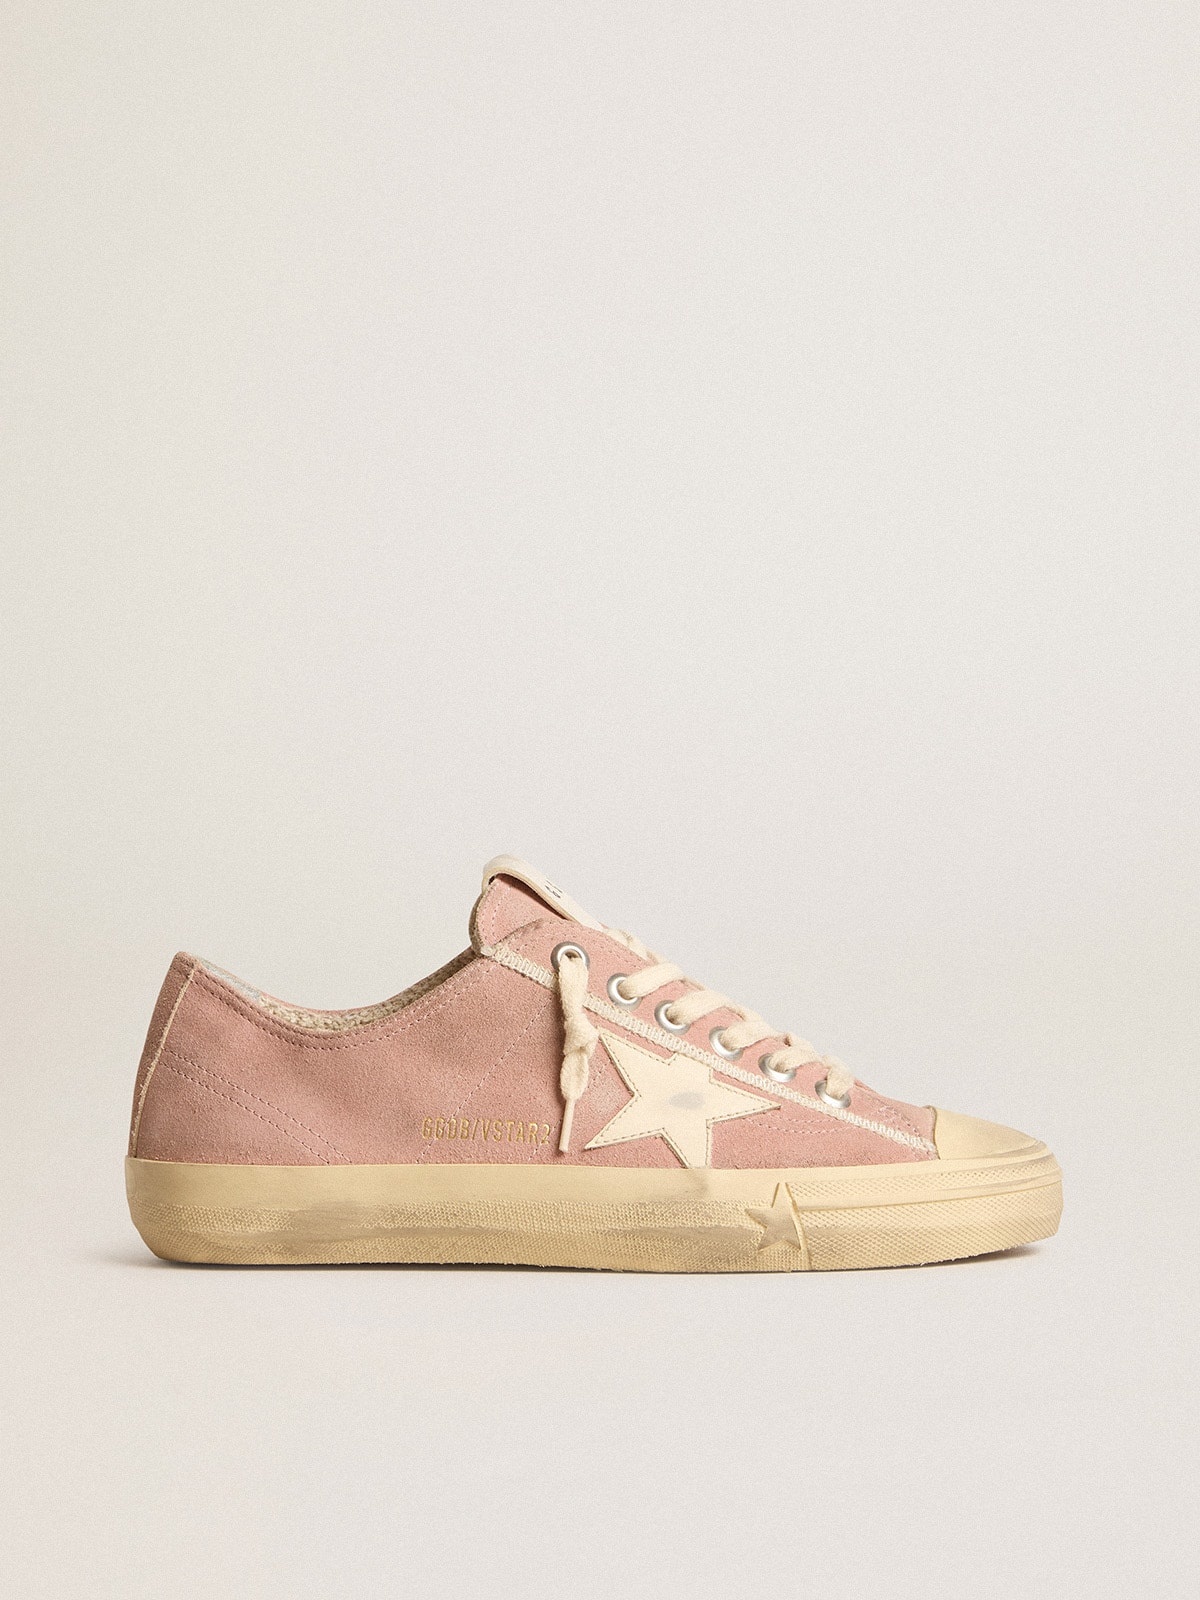 V-Star in pink suede with cream leather star - 1